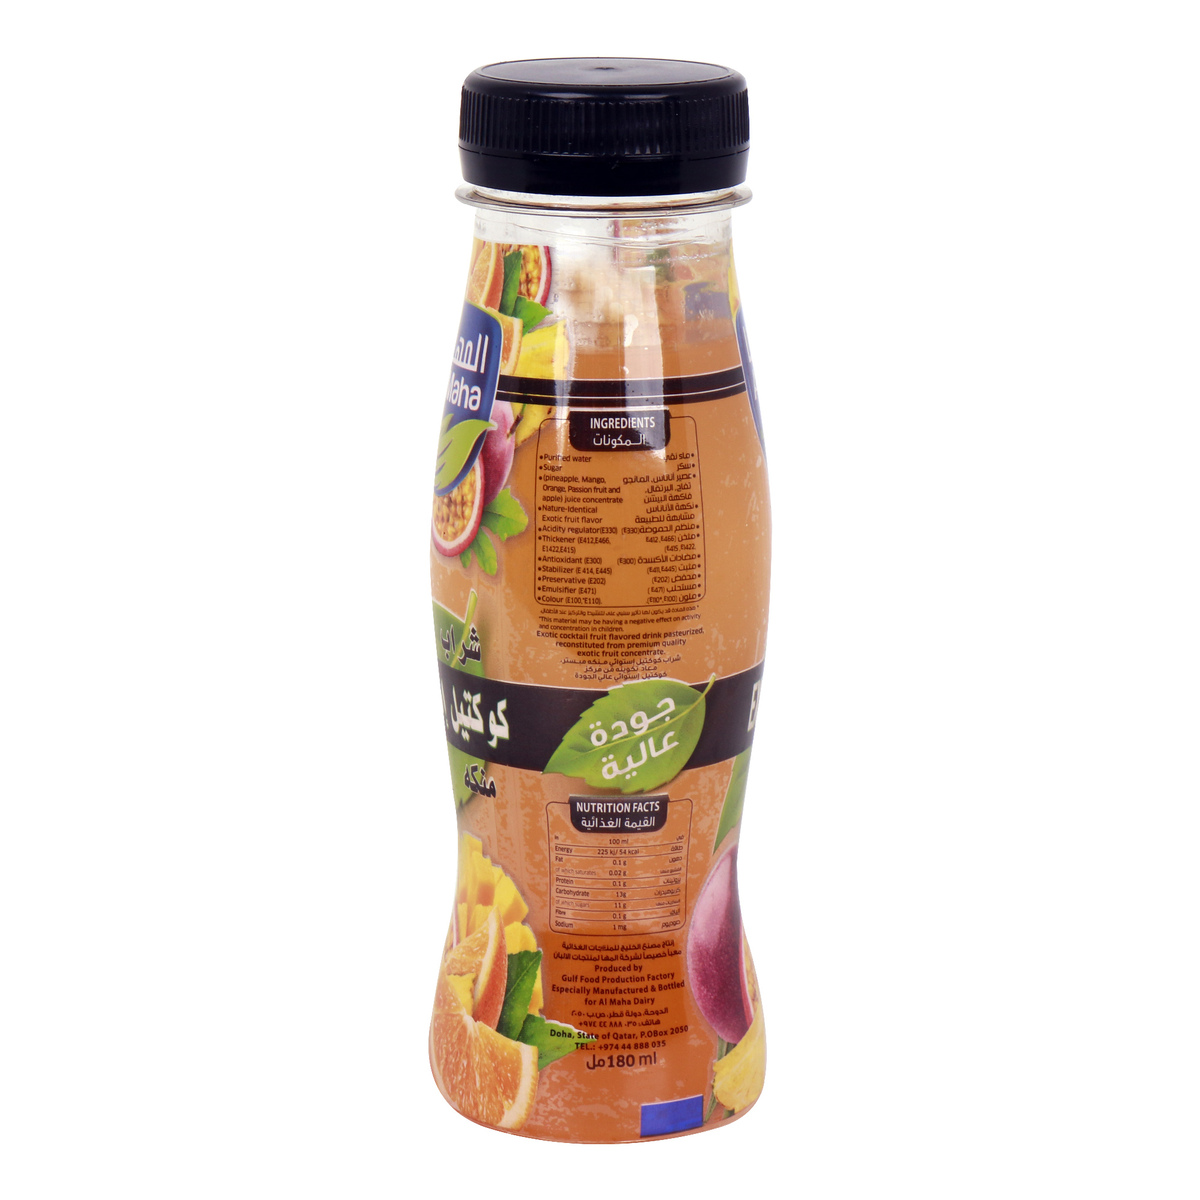 Al Maha Flavored Drink Exotic Cocktail 180ml